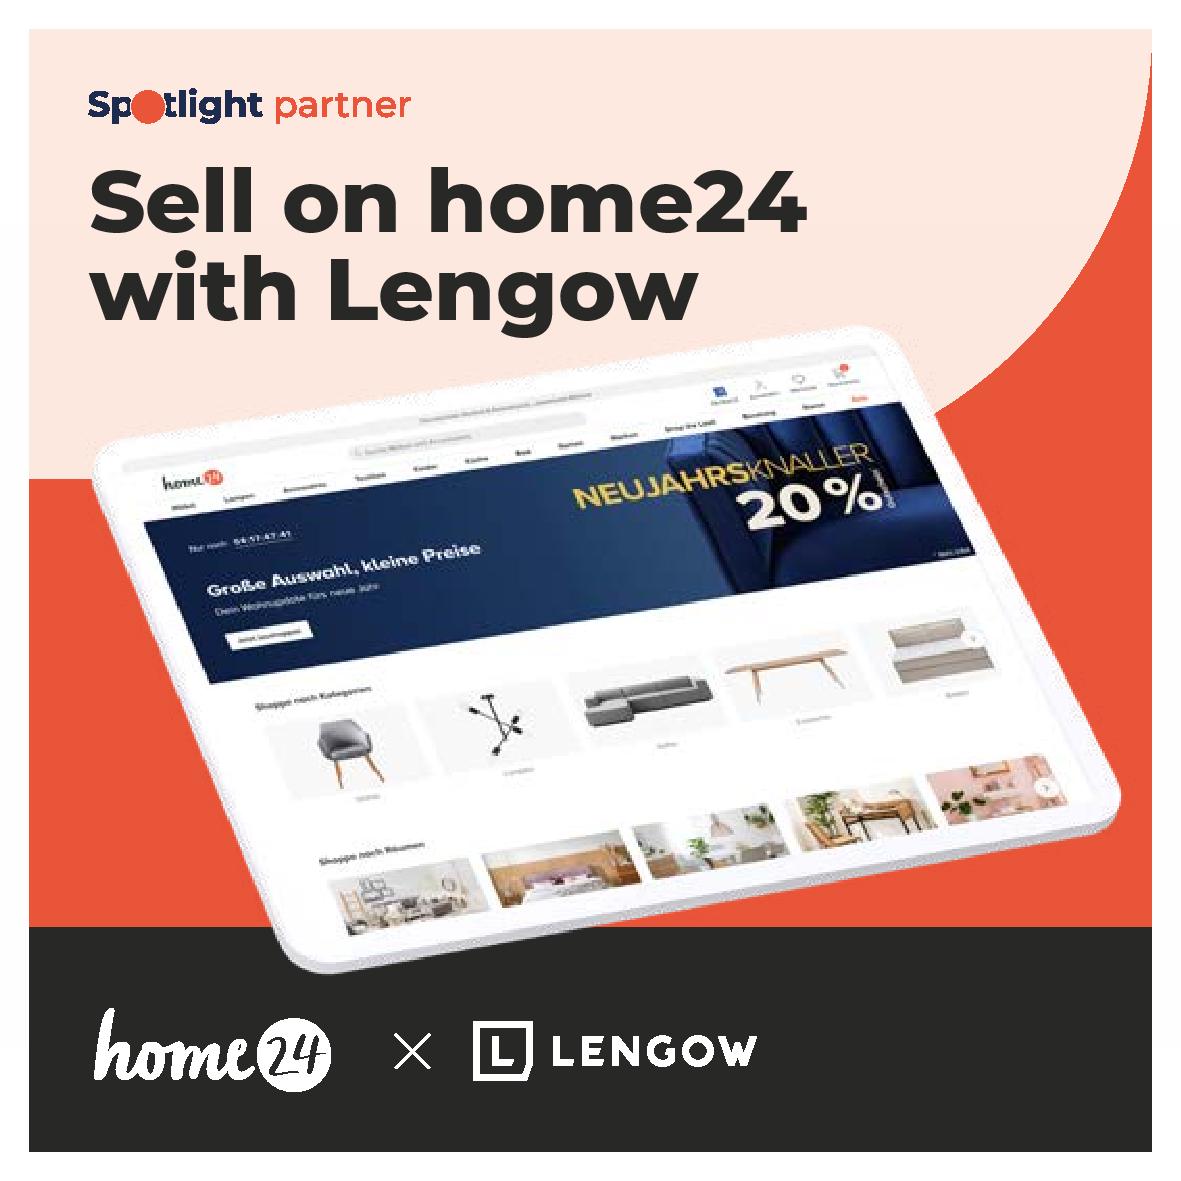 Sell on home24